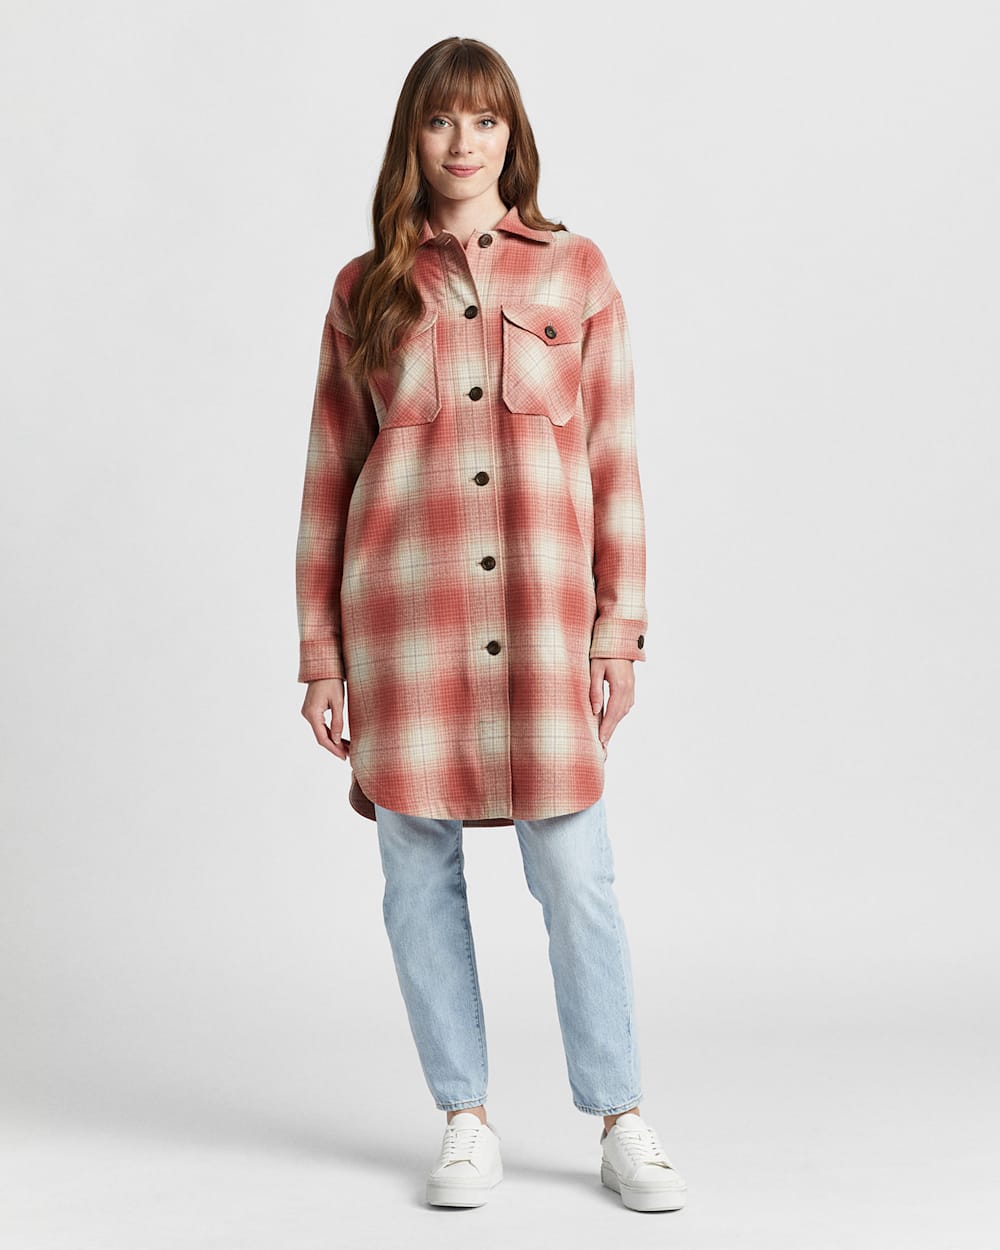 ALTERNATE VIEW OF WOMEN'S WOOL OVERSHIRT IN CORAL OMBRE PLAID image number 2